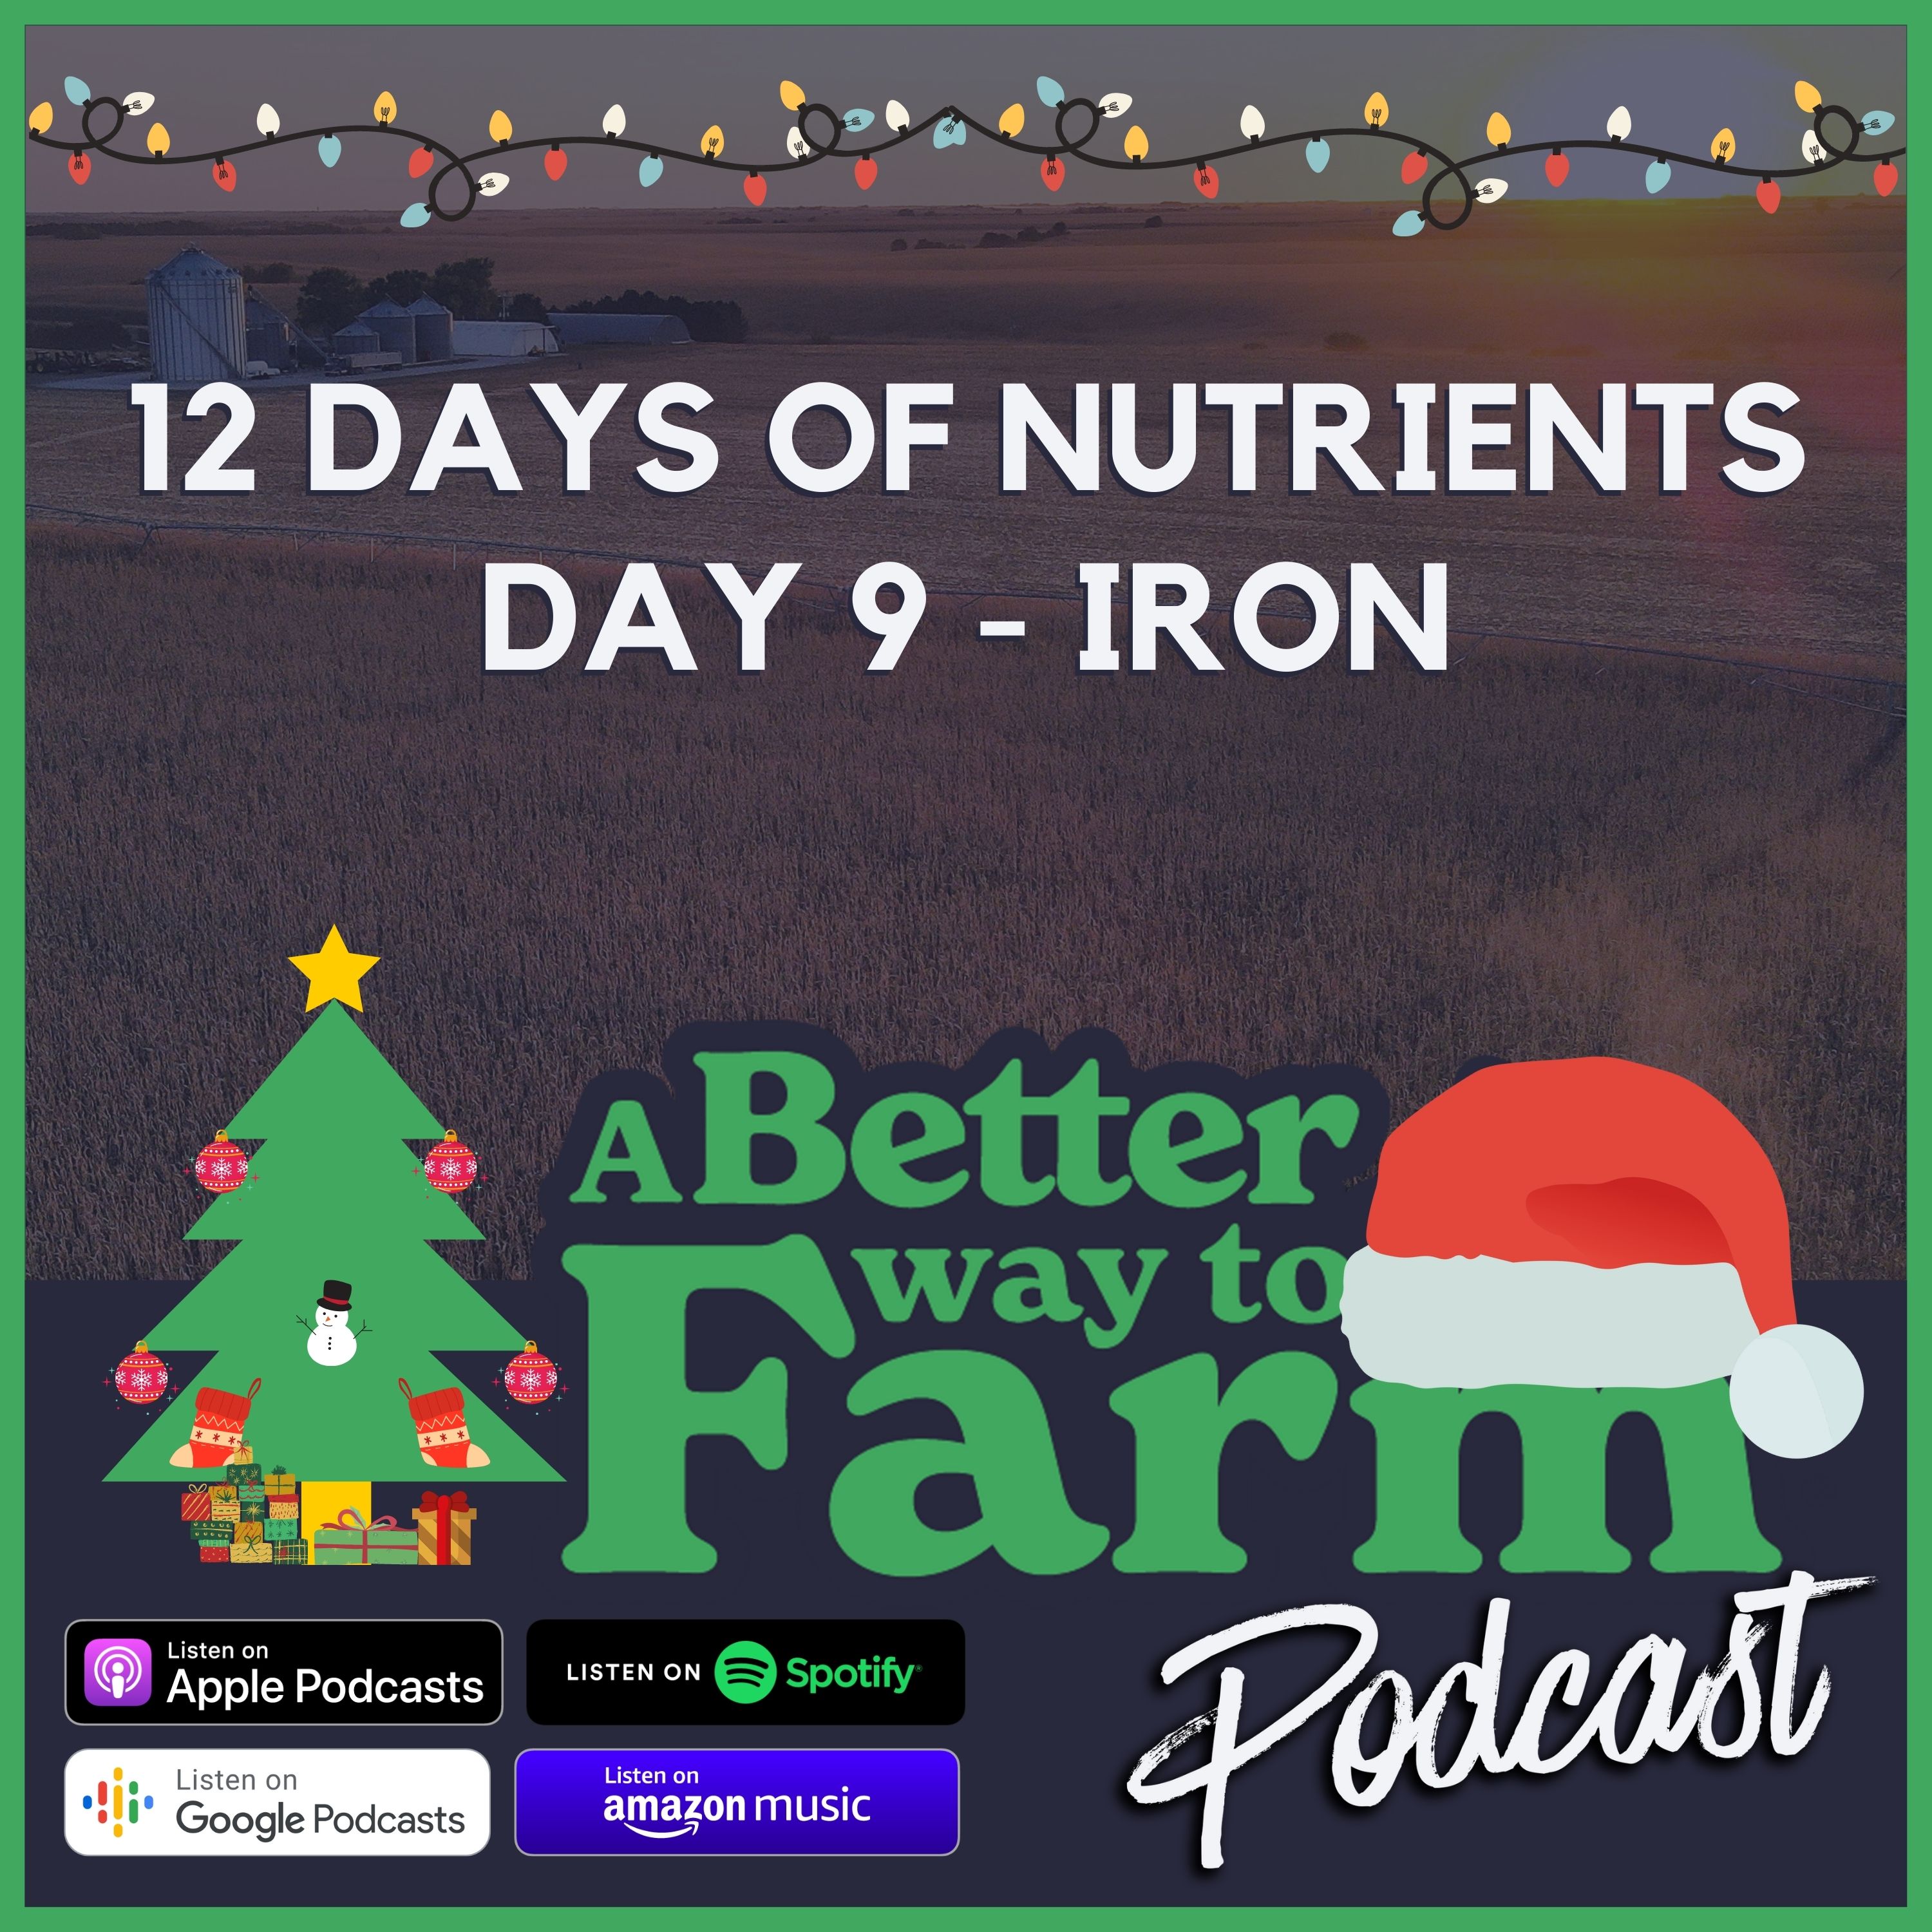 12 Days of Nutrients: Day 9 - Iron